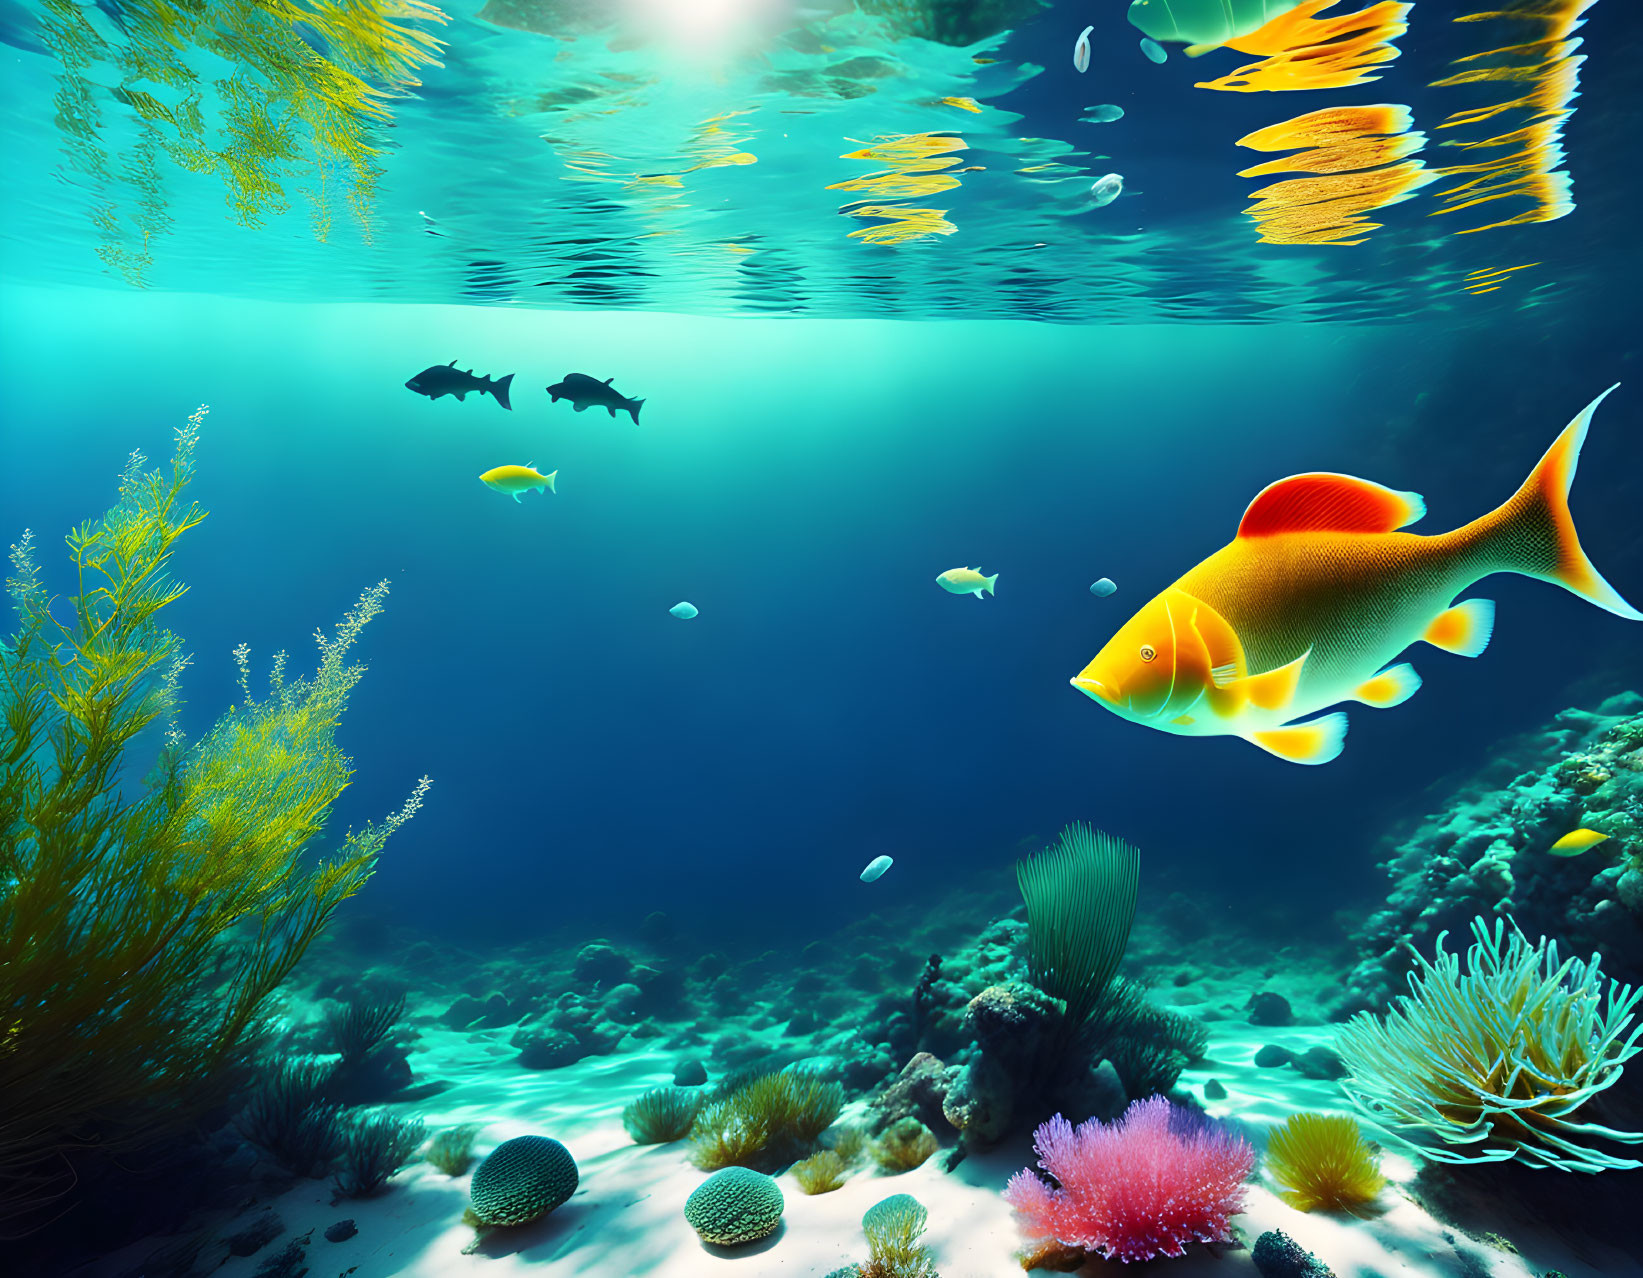 Colorful Tropical Fish and Coral Reefs in Vibrant Underwater Scene